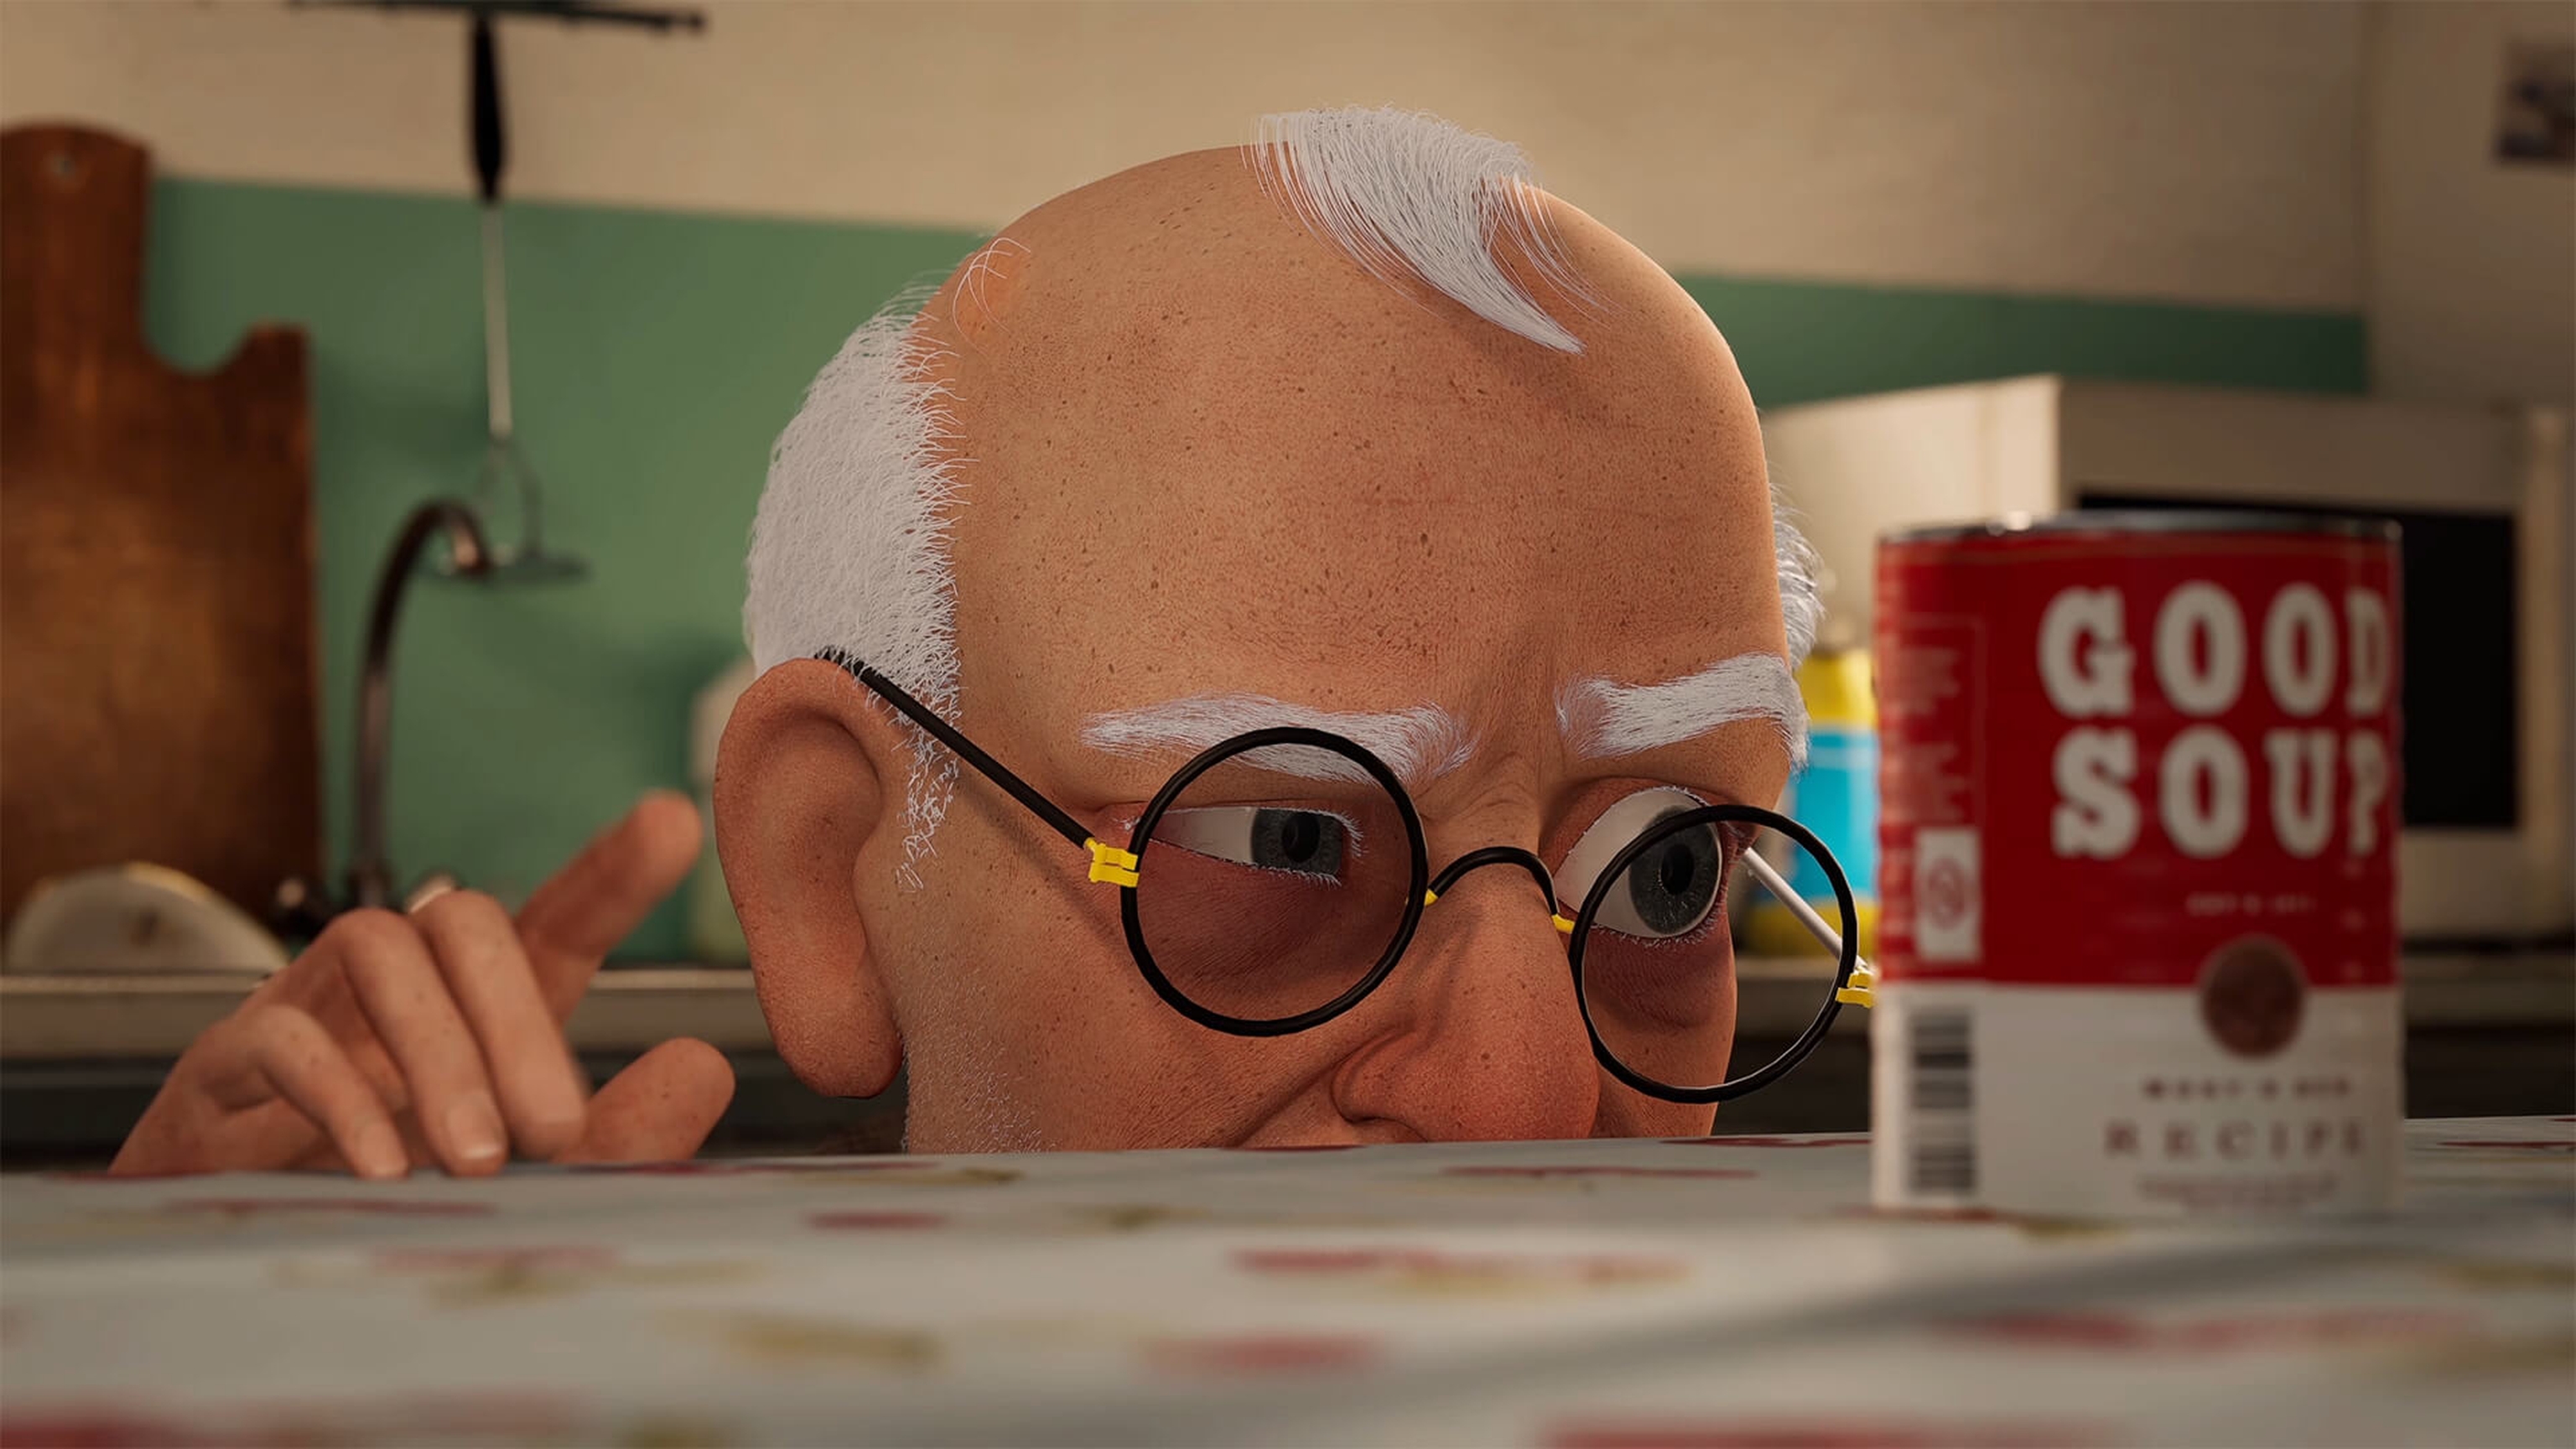 3D animation student work showing a senior gentleman looking at a can of soup